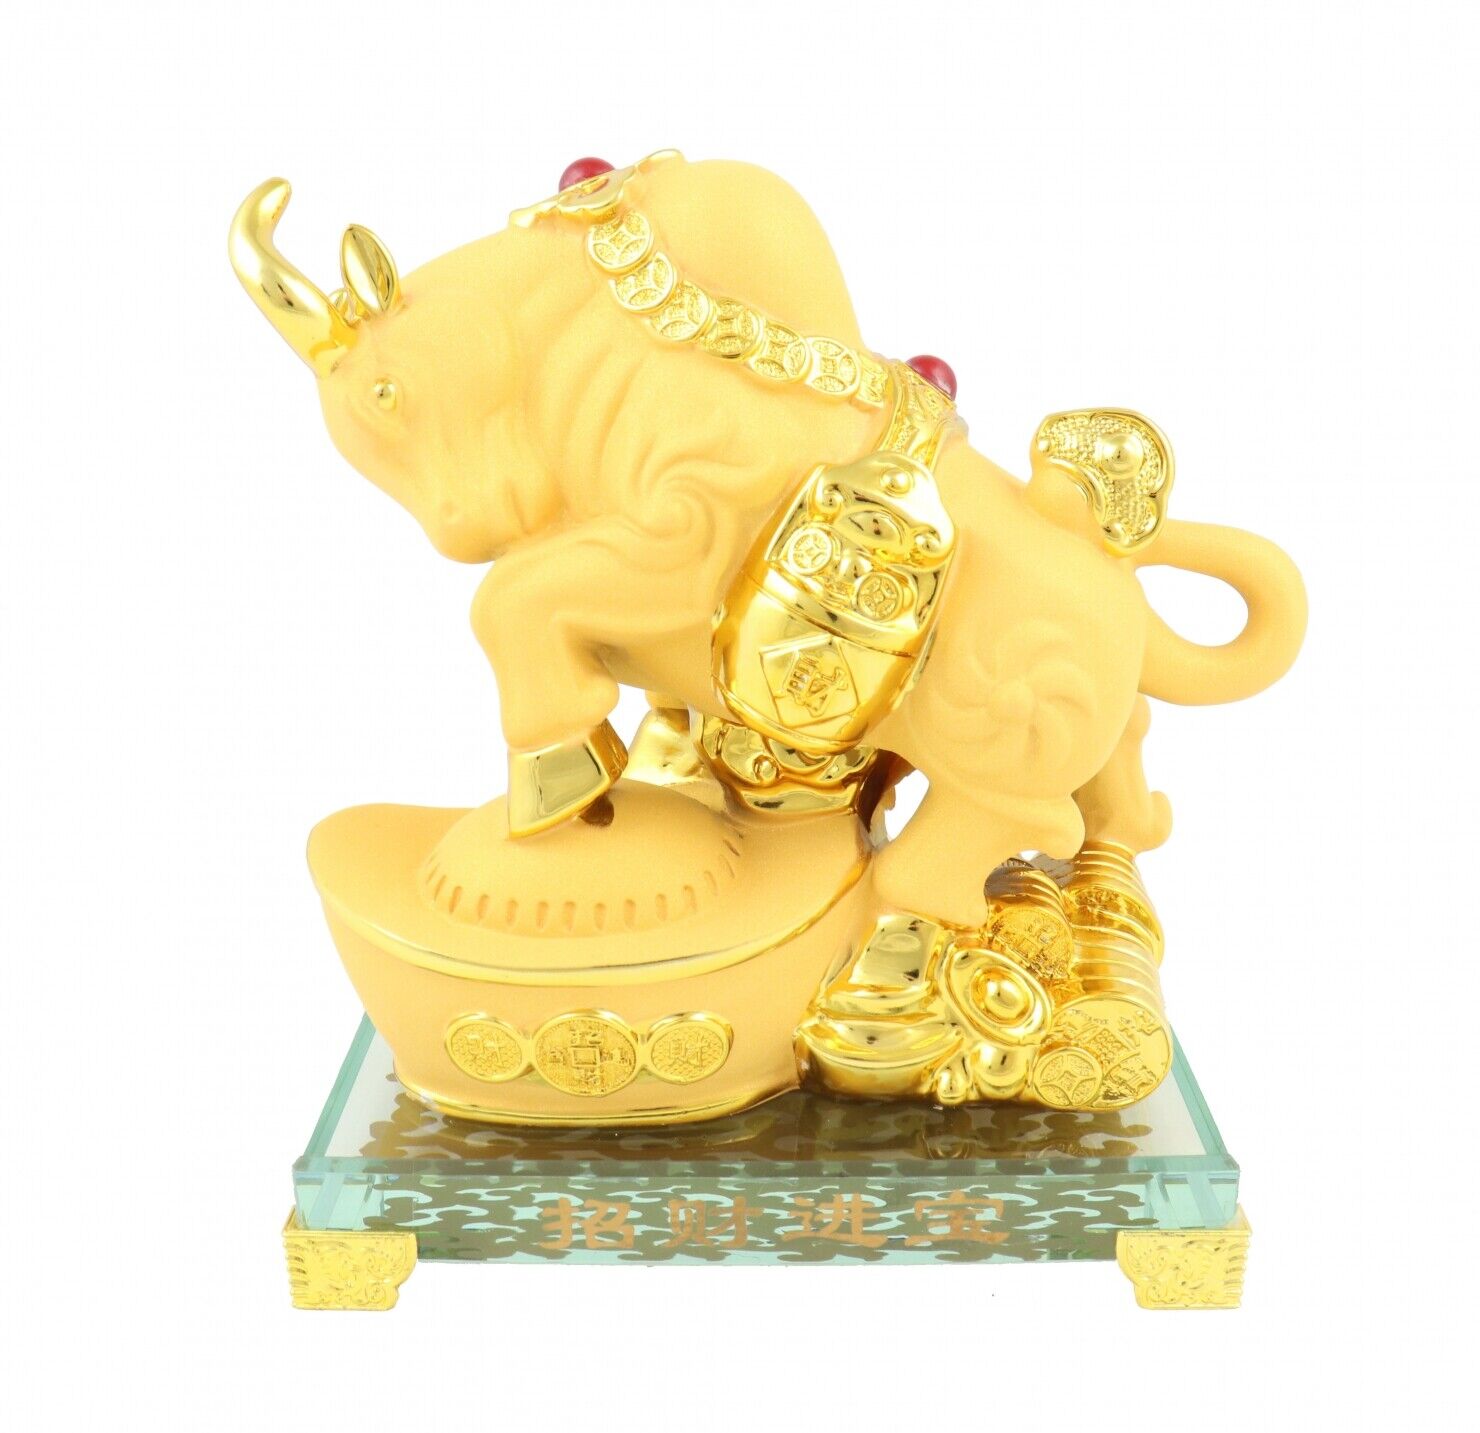 Golden Ox Statue Stepping on Big Ingot for Chinese Lunar Year of the Ox